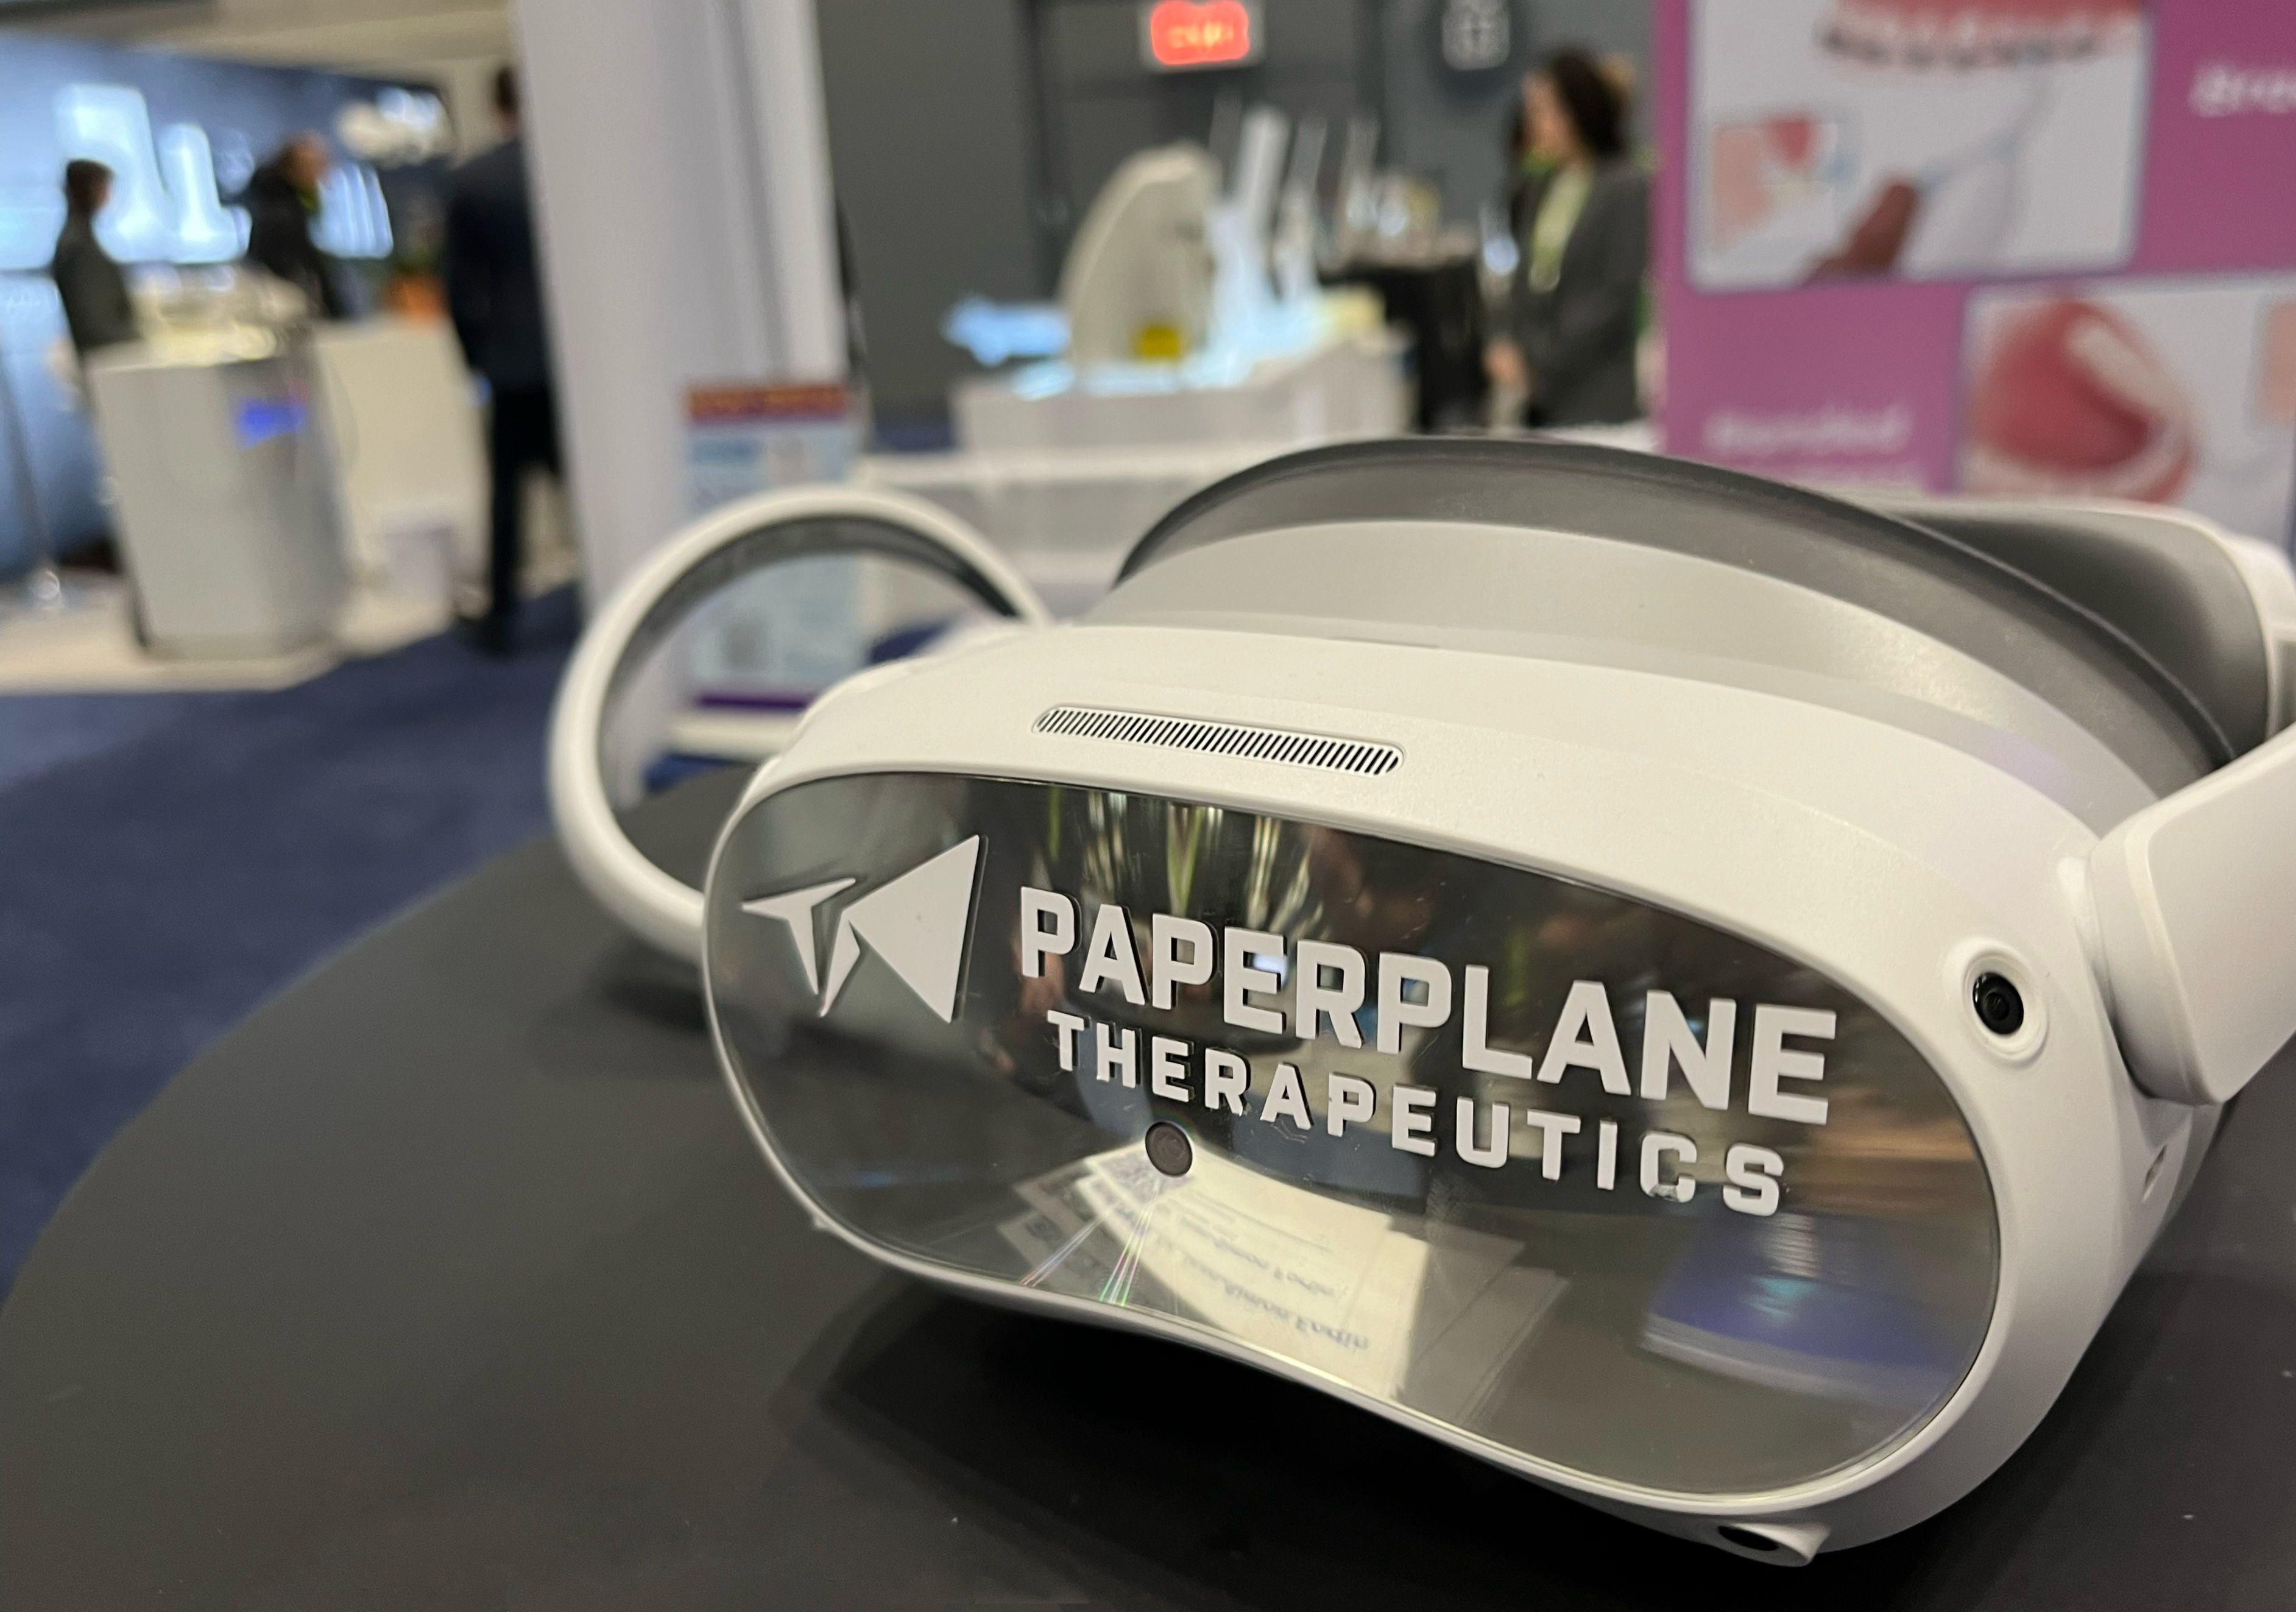 Dream Dental headset from Paperplane Therapeutics